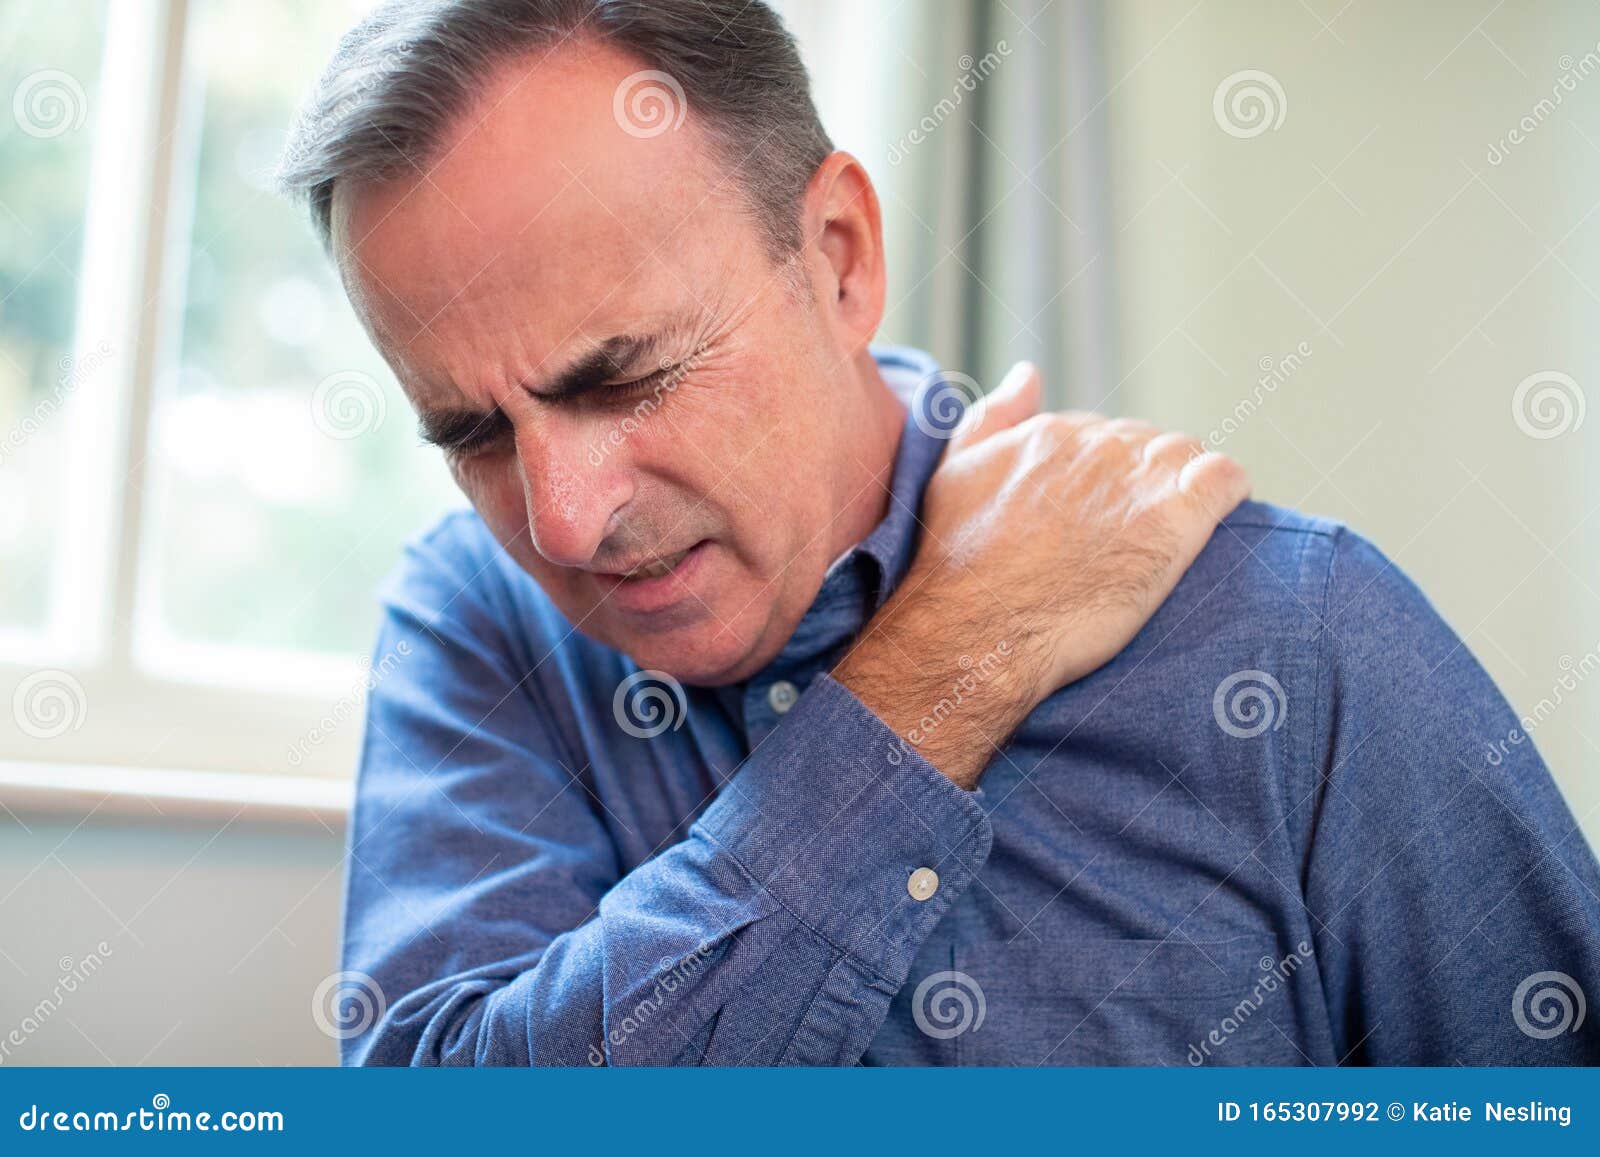 mature man suffering with trapped nerve in shoulder at home